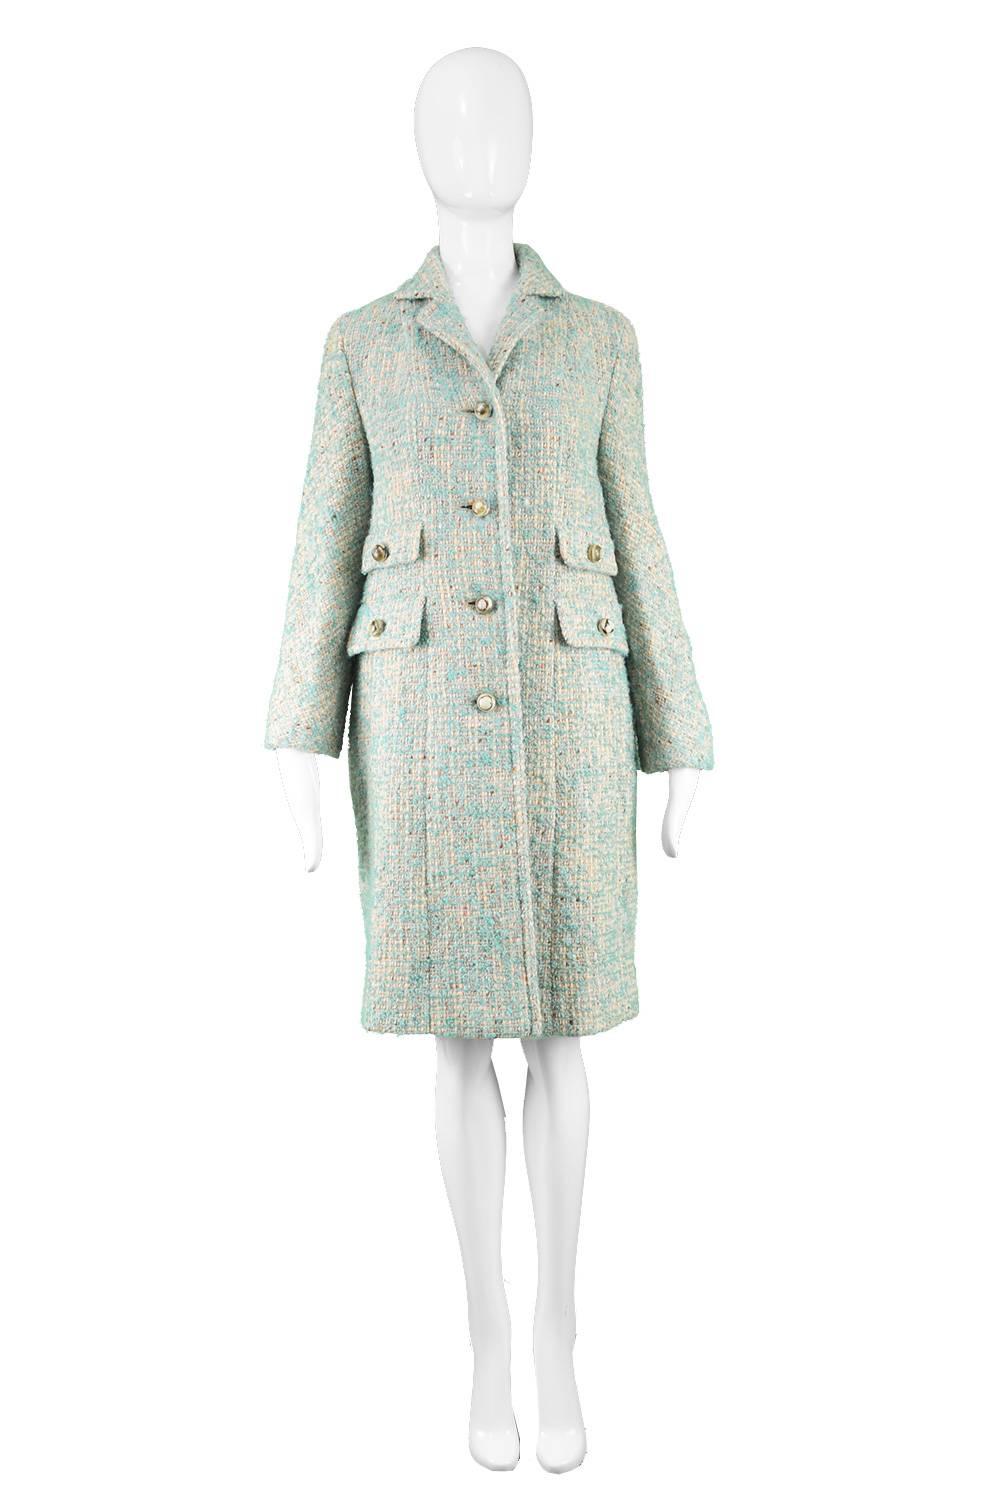 Aquascutum Vintage 1960s Cream & Turquoise Blue Wool Boucle Tweed Coat 

Estimated Size: Women's Medium. Please check measurements.
Bust - 40” / 101cm (allow a couple of inches room for movement)
Waist - 40” / 101cm
Hips -42” / 106cm
Length